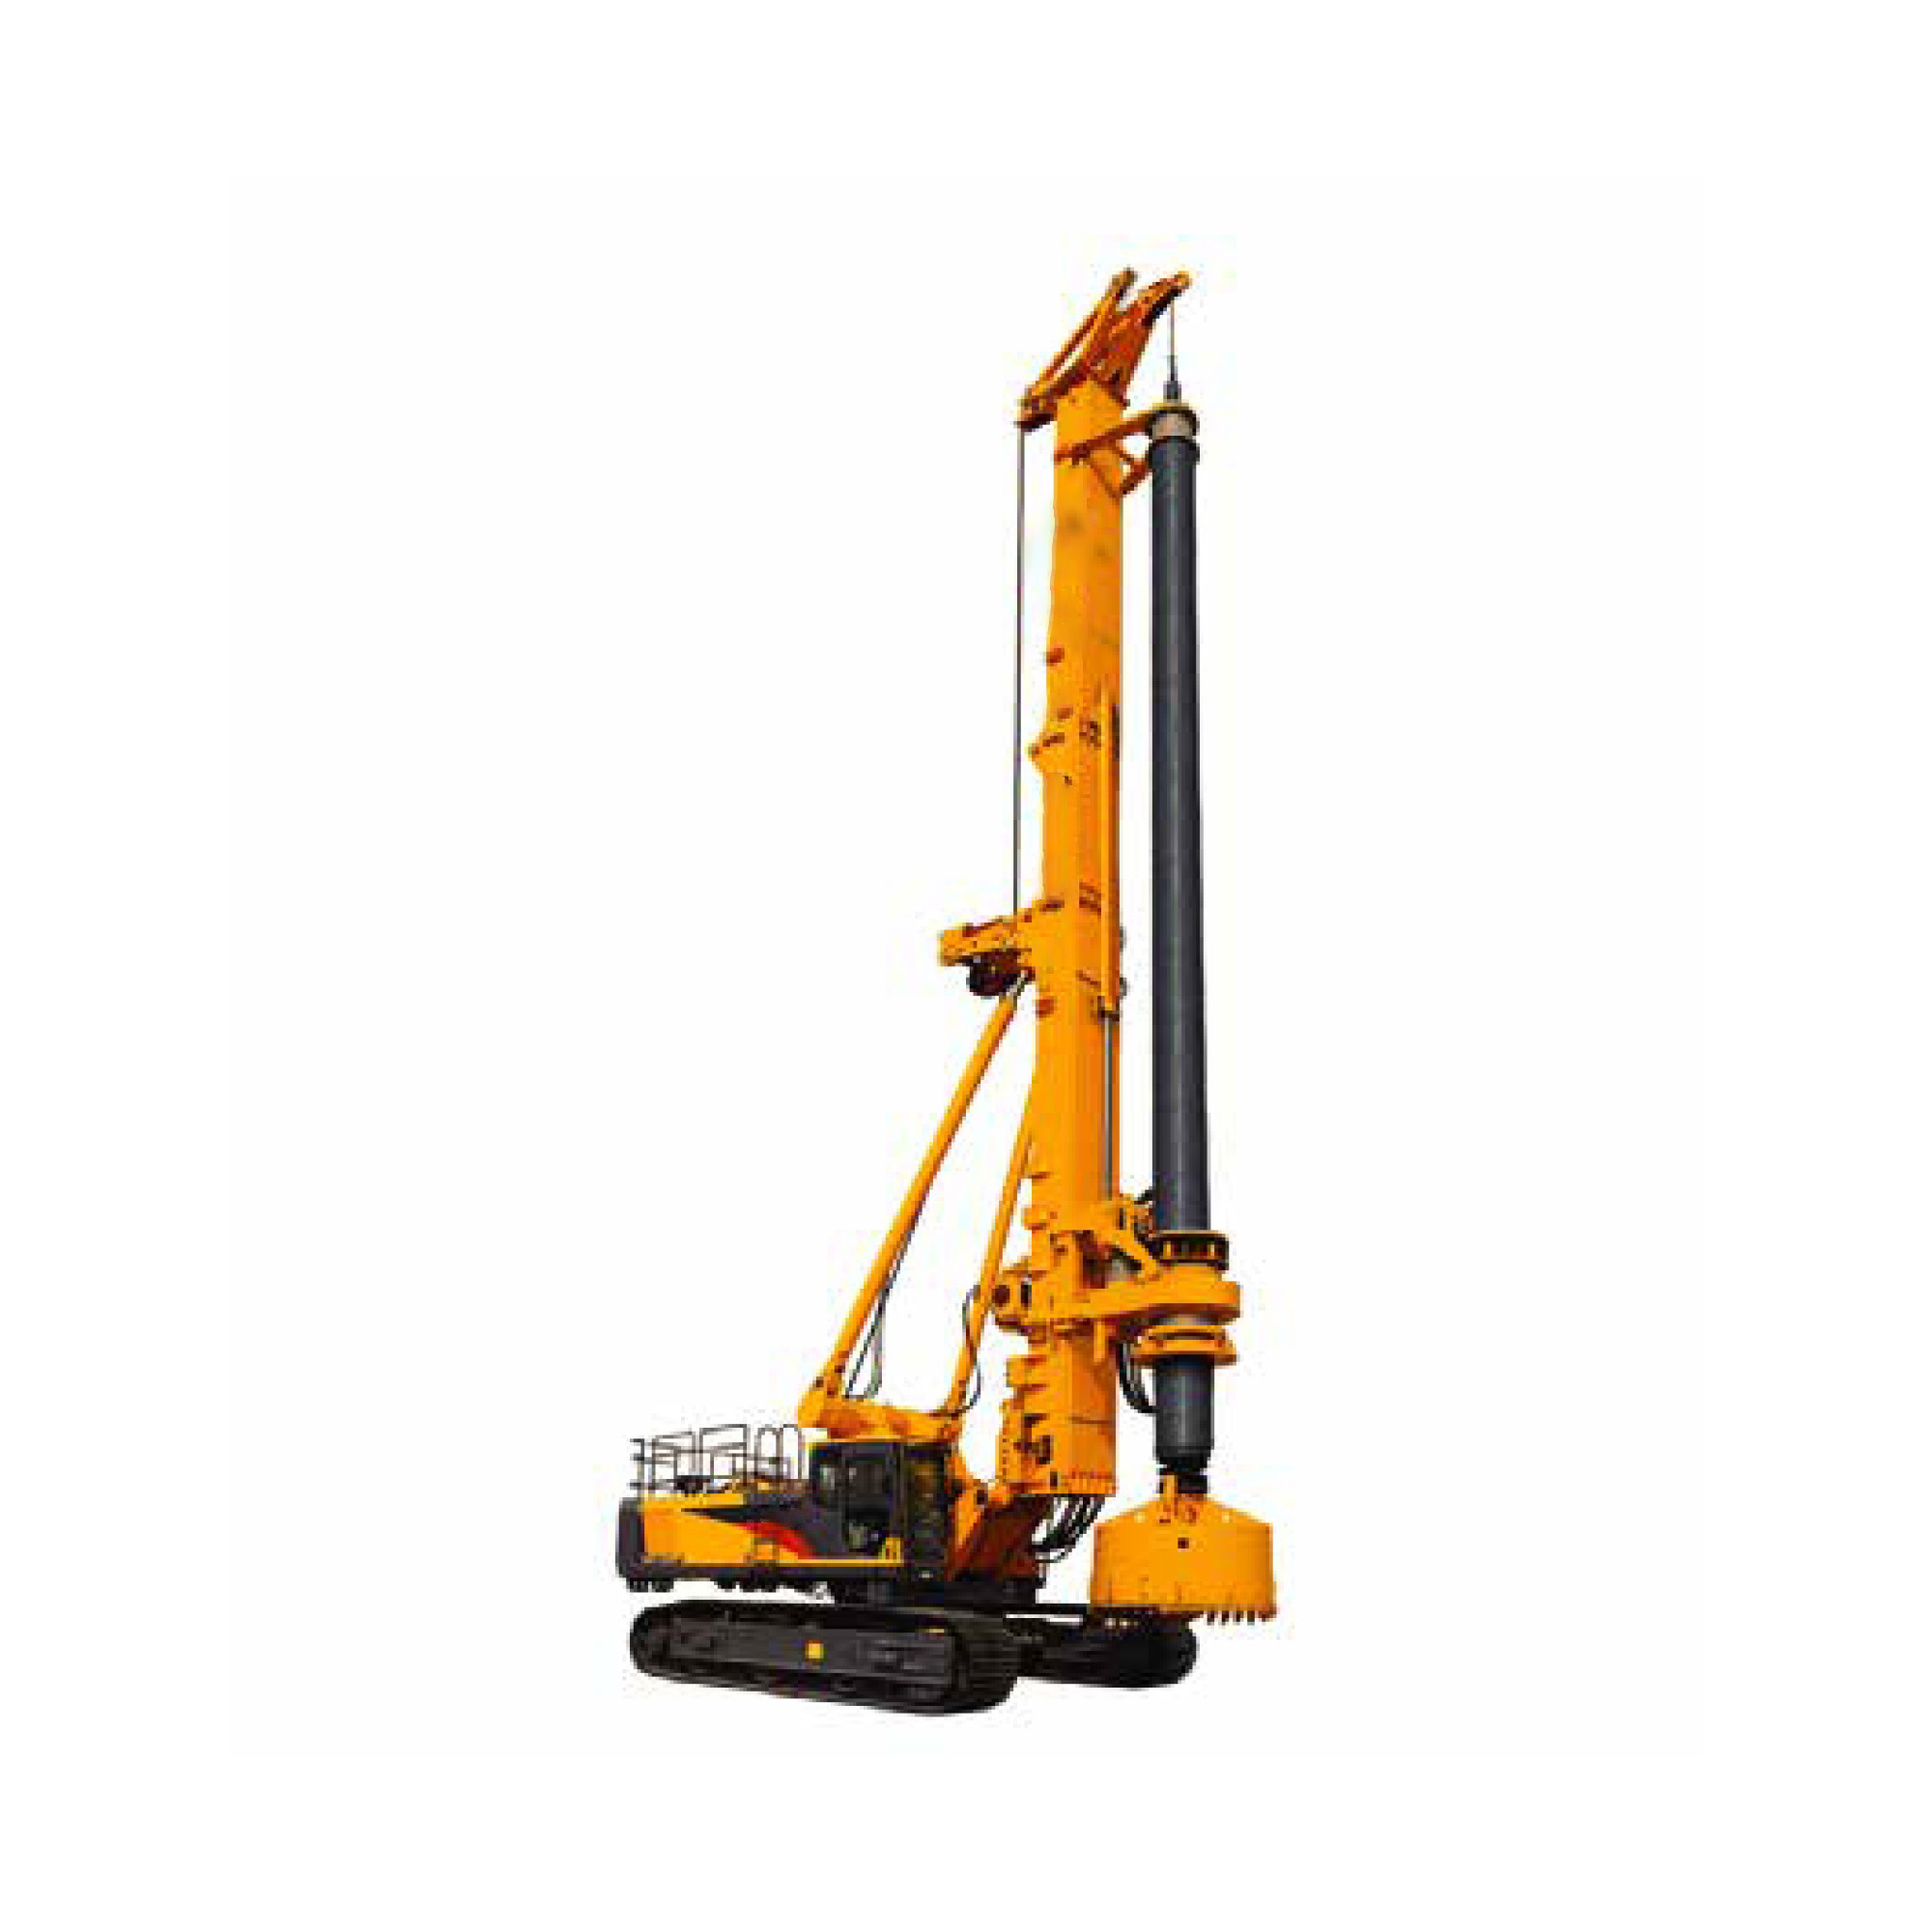 Xr Series Mini Rotary Drilling Rigs Xr130e 130kn 50m for Concrete